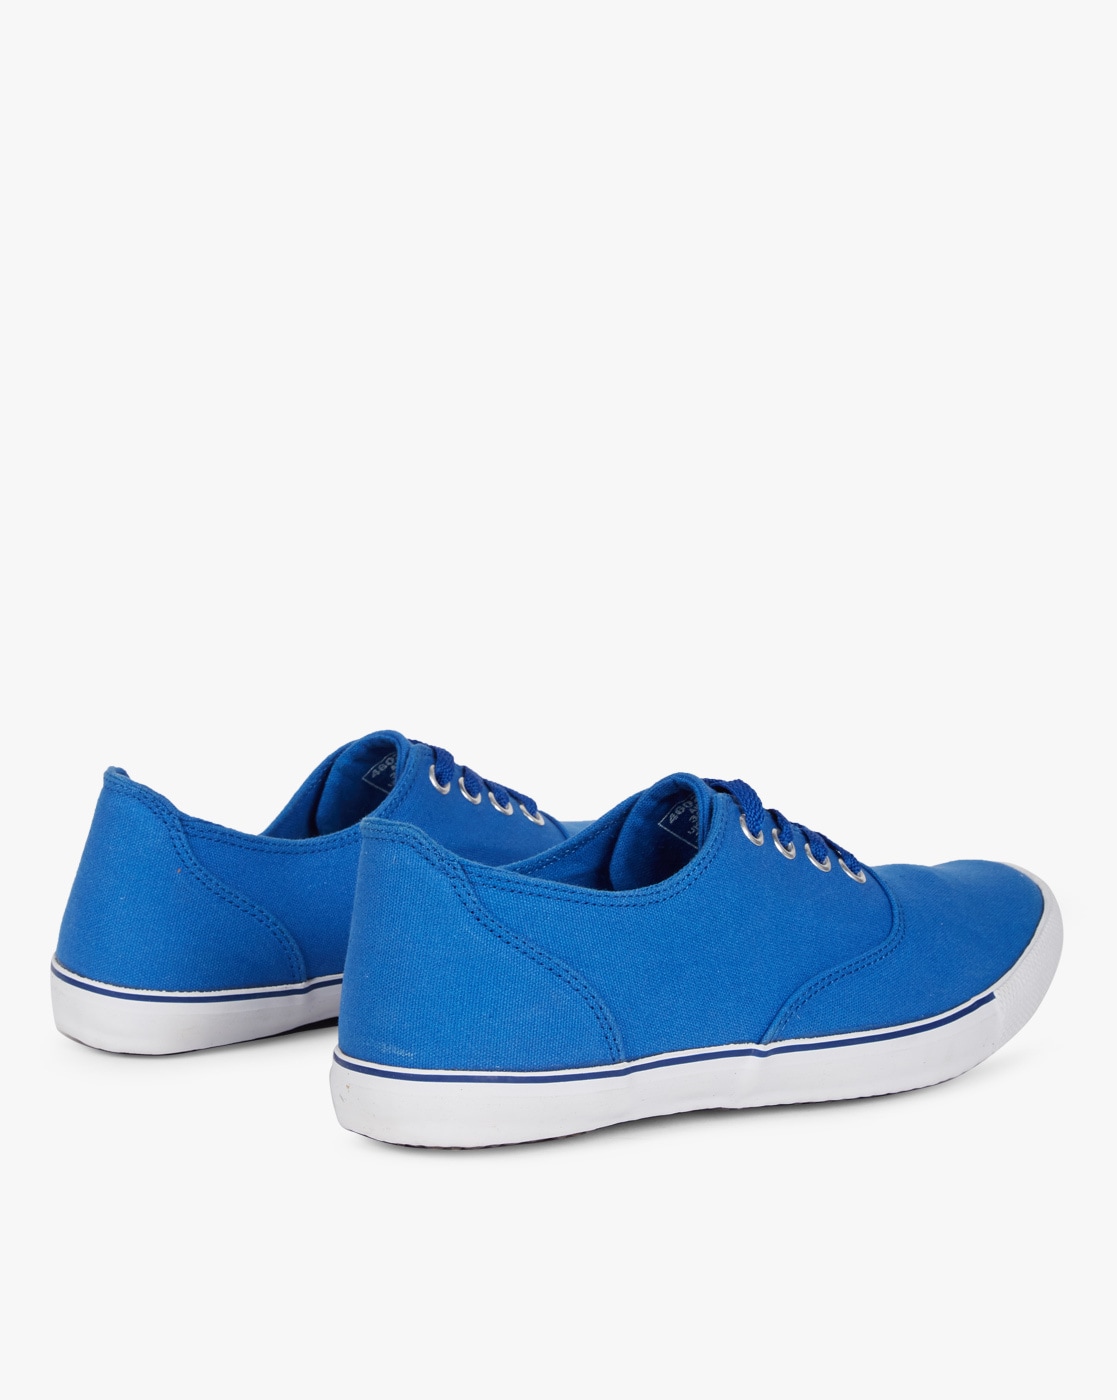 blue canvas lace up sneakers